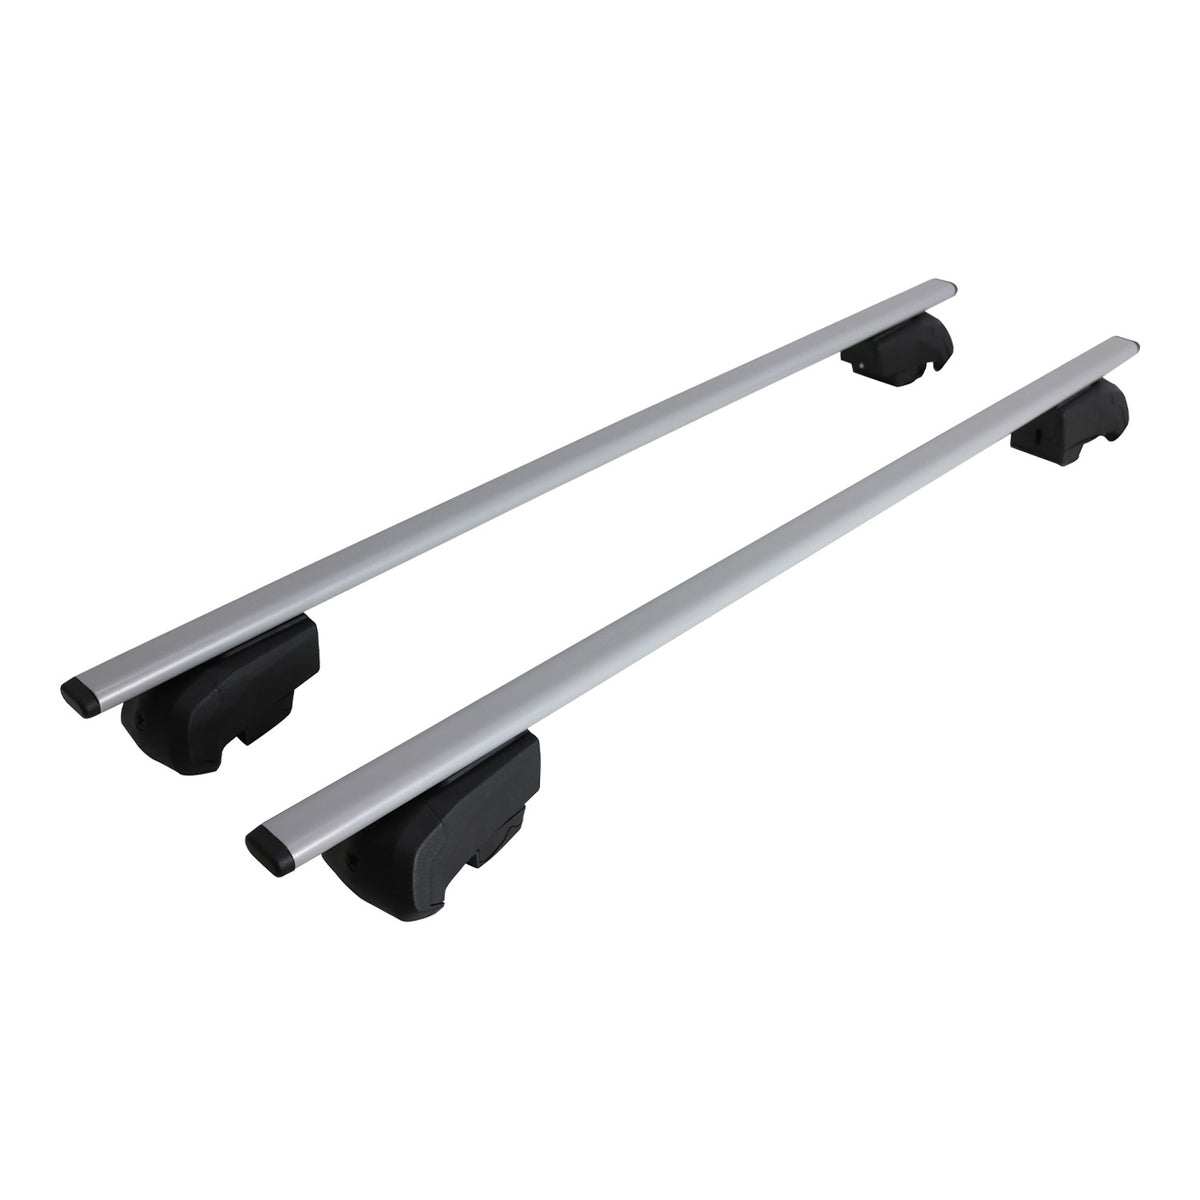 Roof rack luggage rack for Audi A3 8P 2004-2012 basic rack TÜV ABE silver 2x